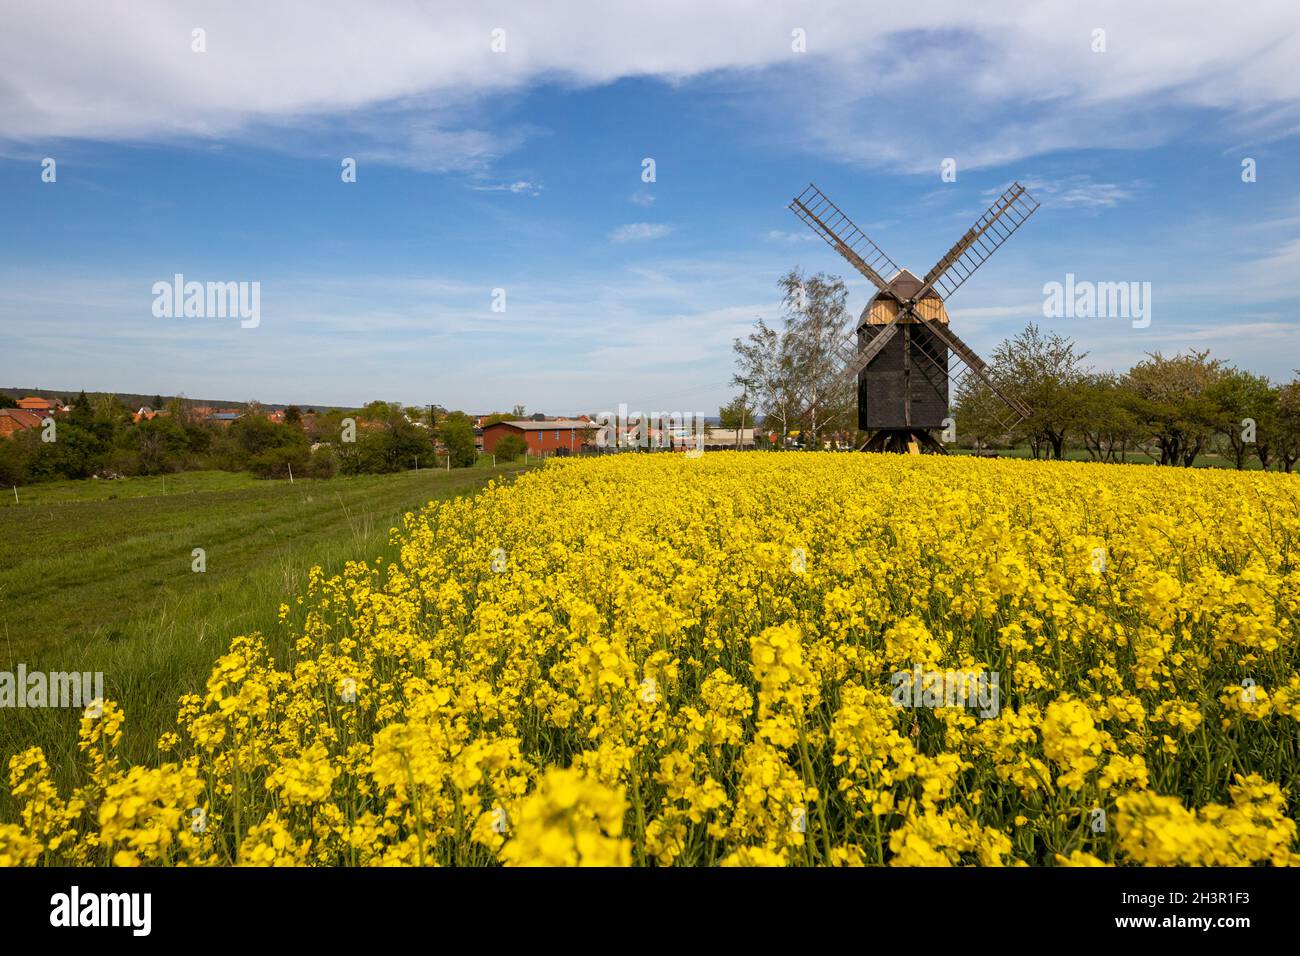 Windmill Sargstedt in the Huy Stock Photo